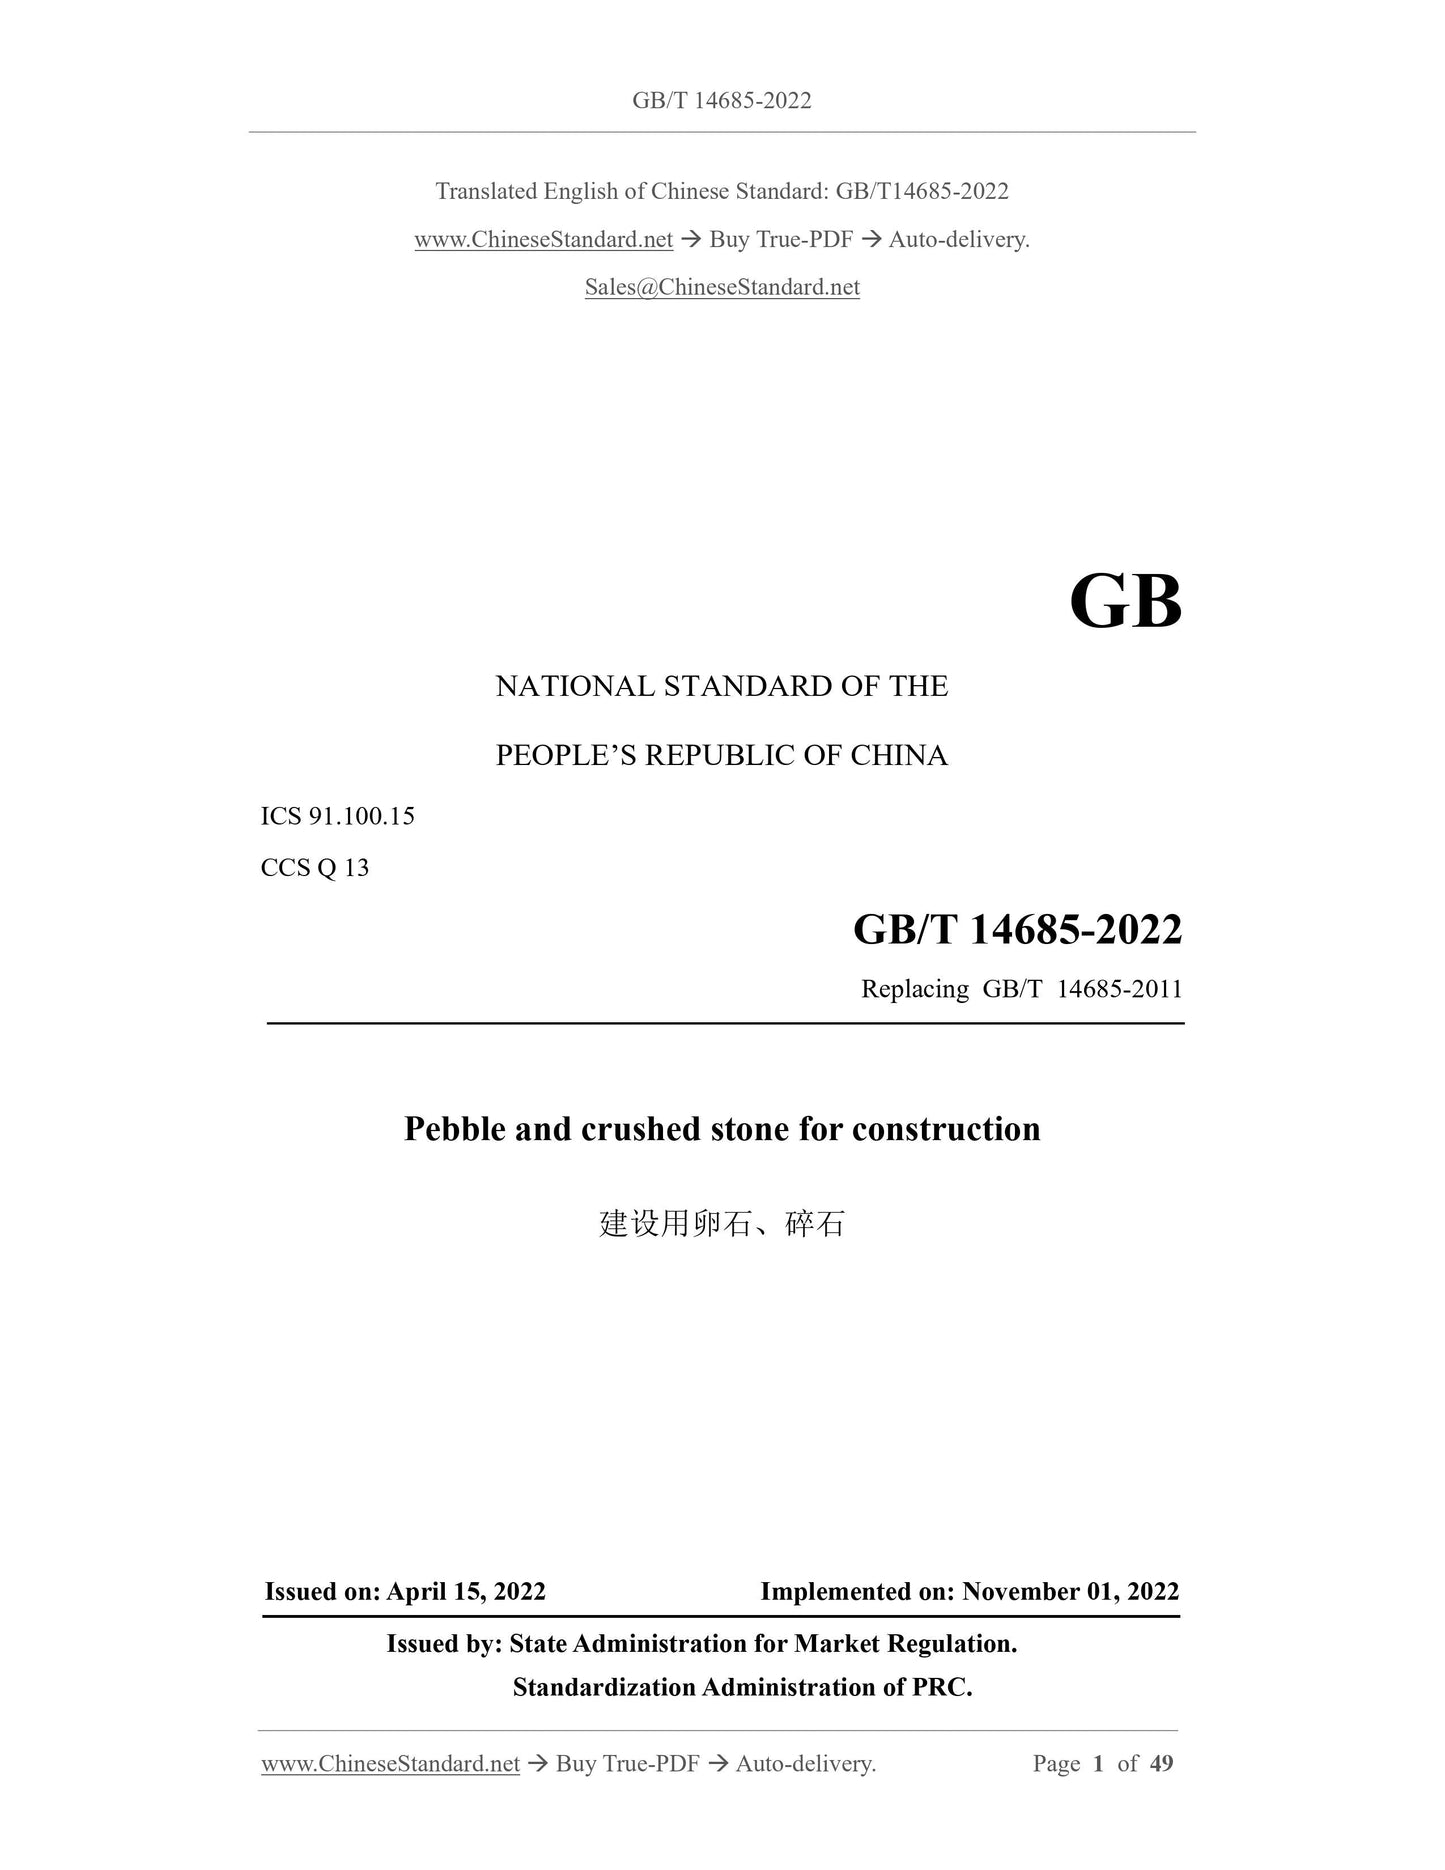 GB/T 14685-2022 Page 1